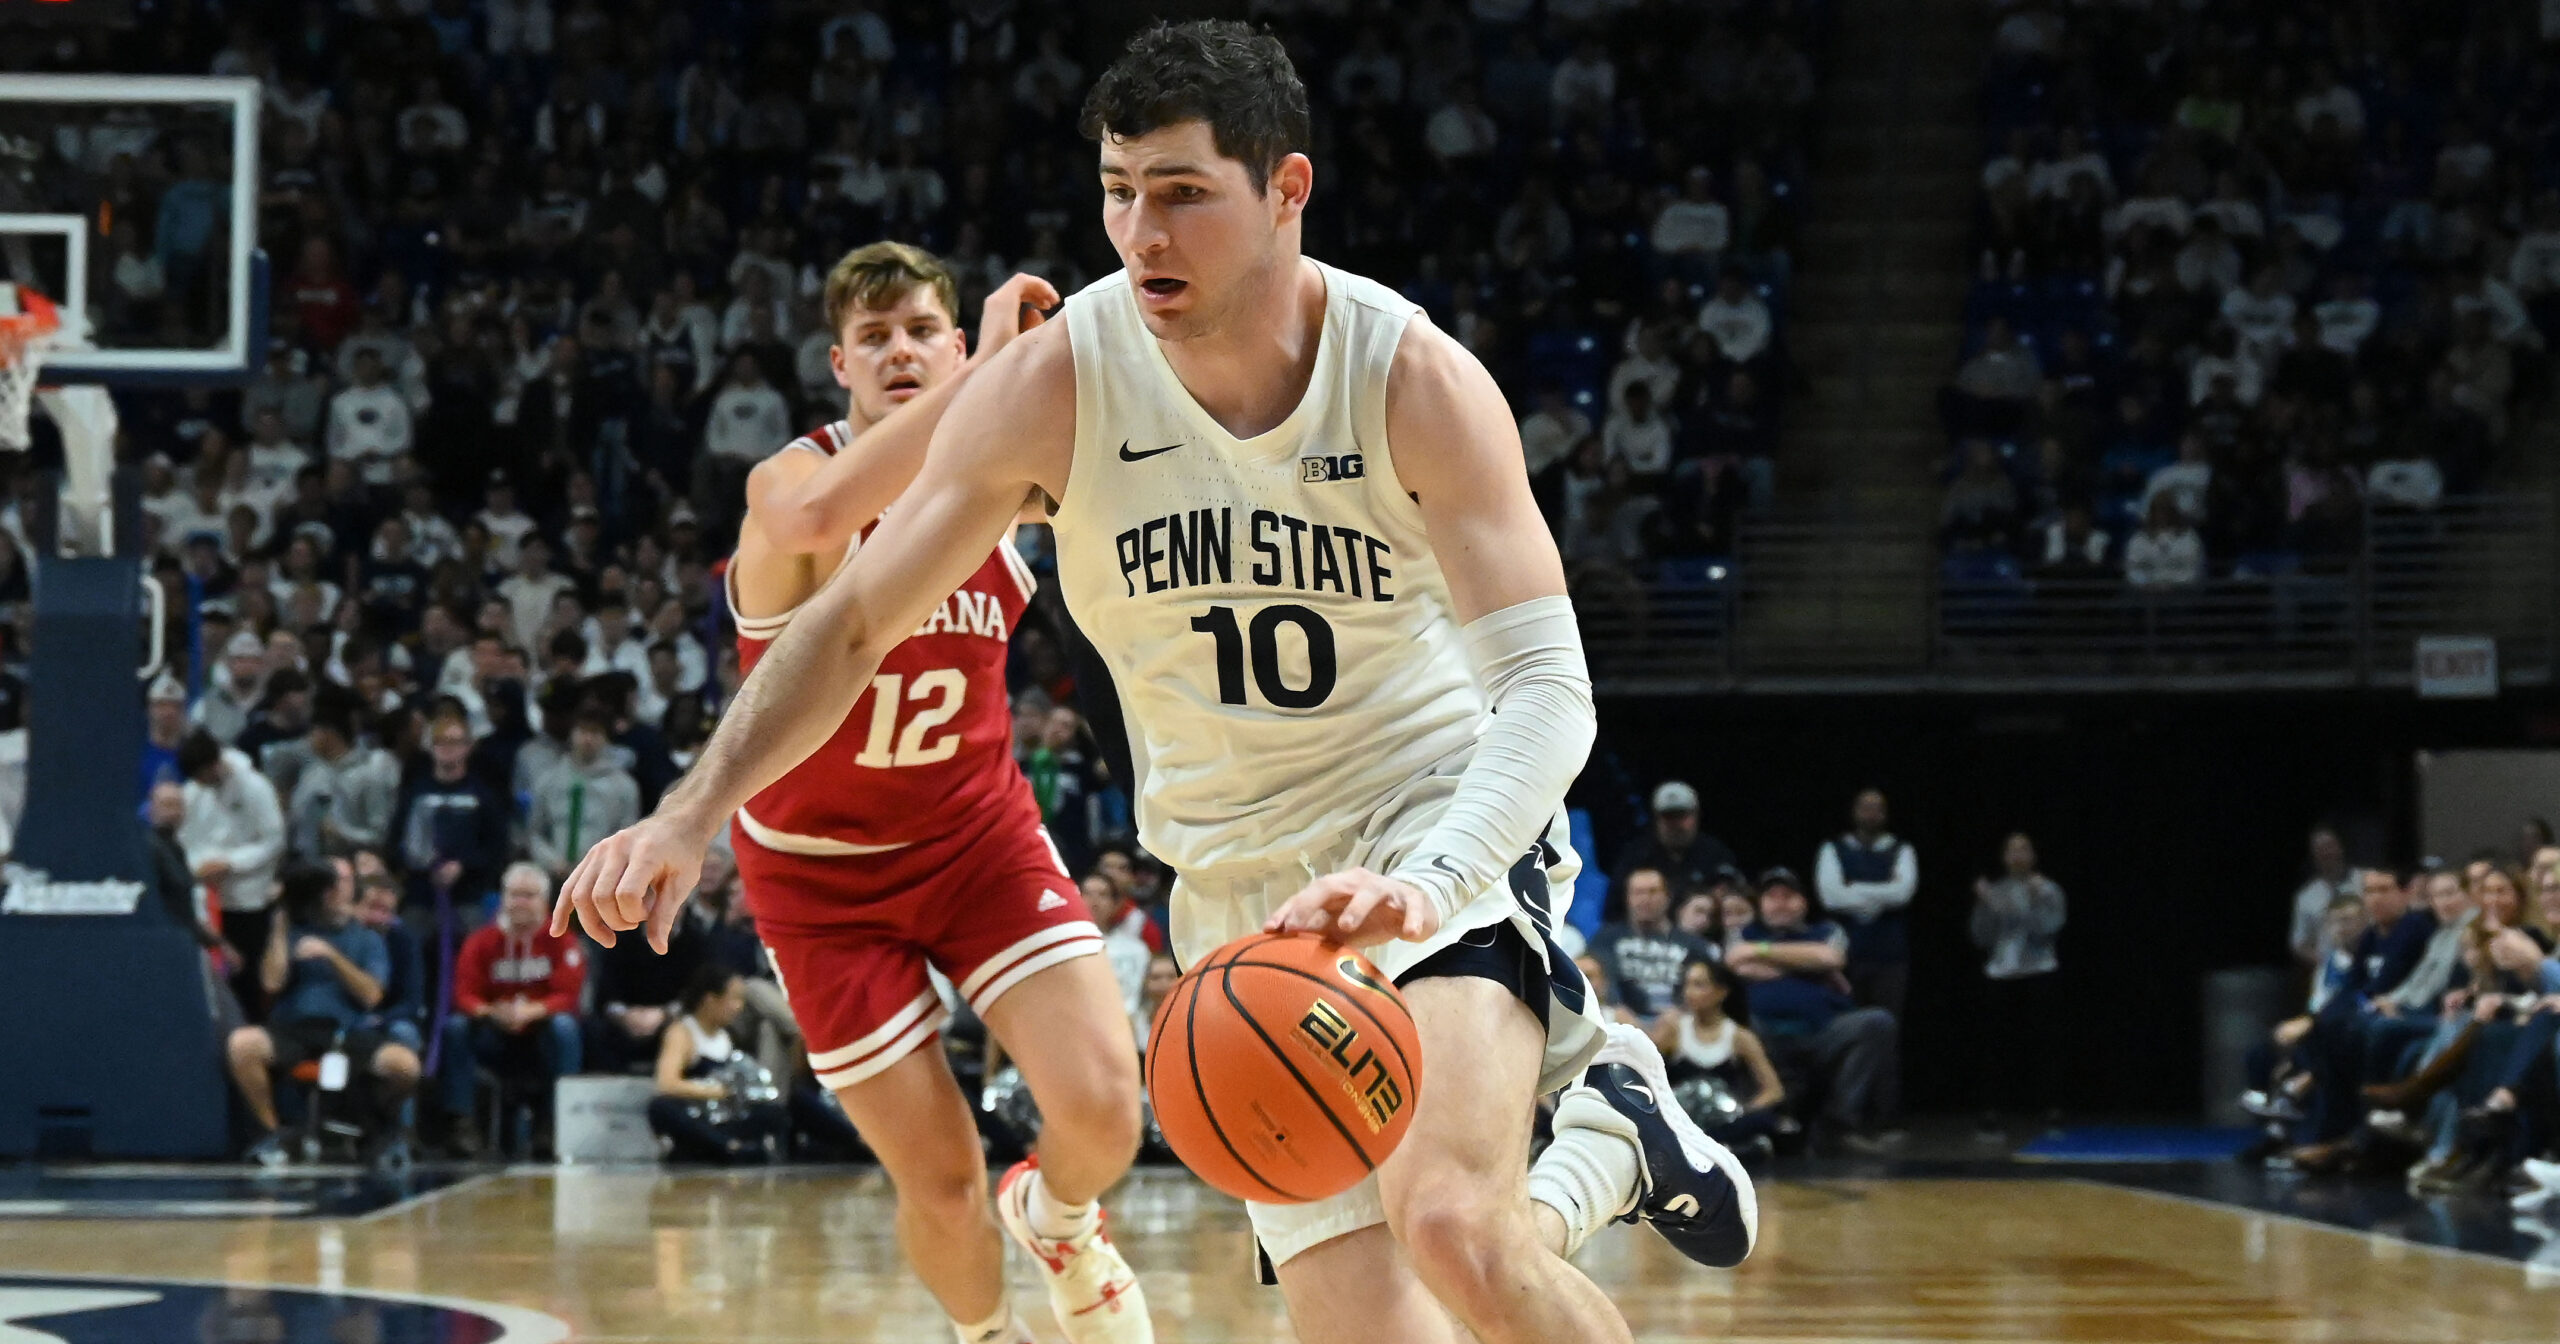 BWI Photos Penn State knocks off Indiana, 8566 On3